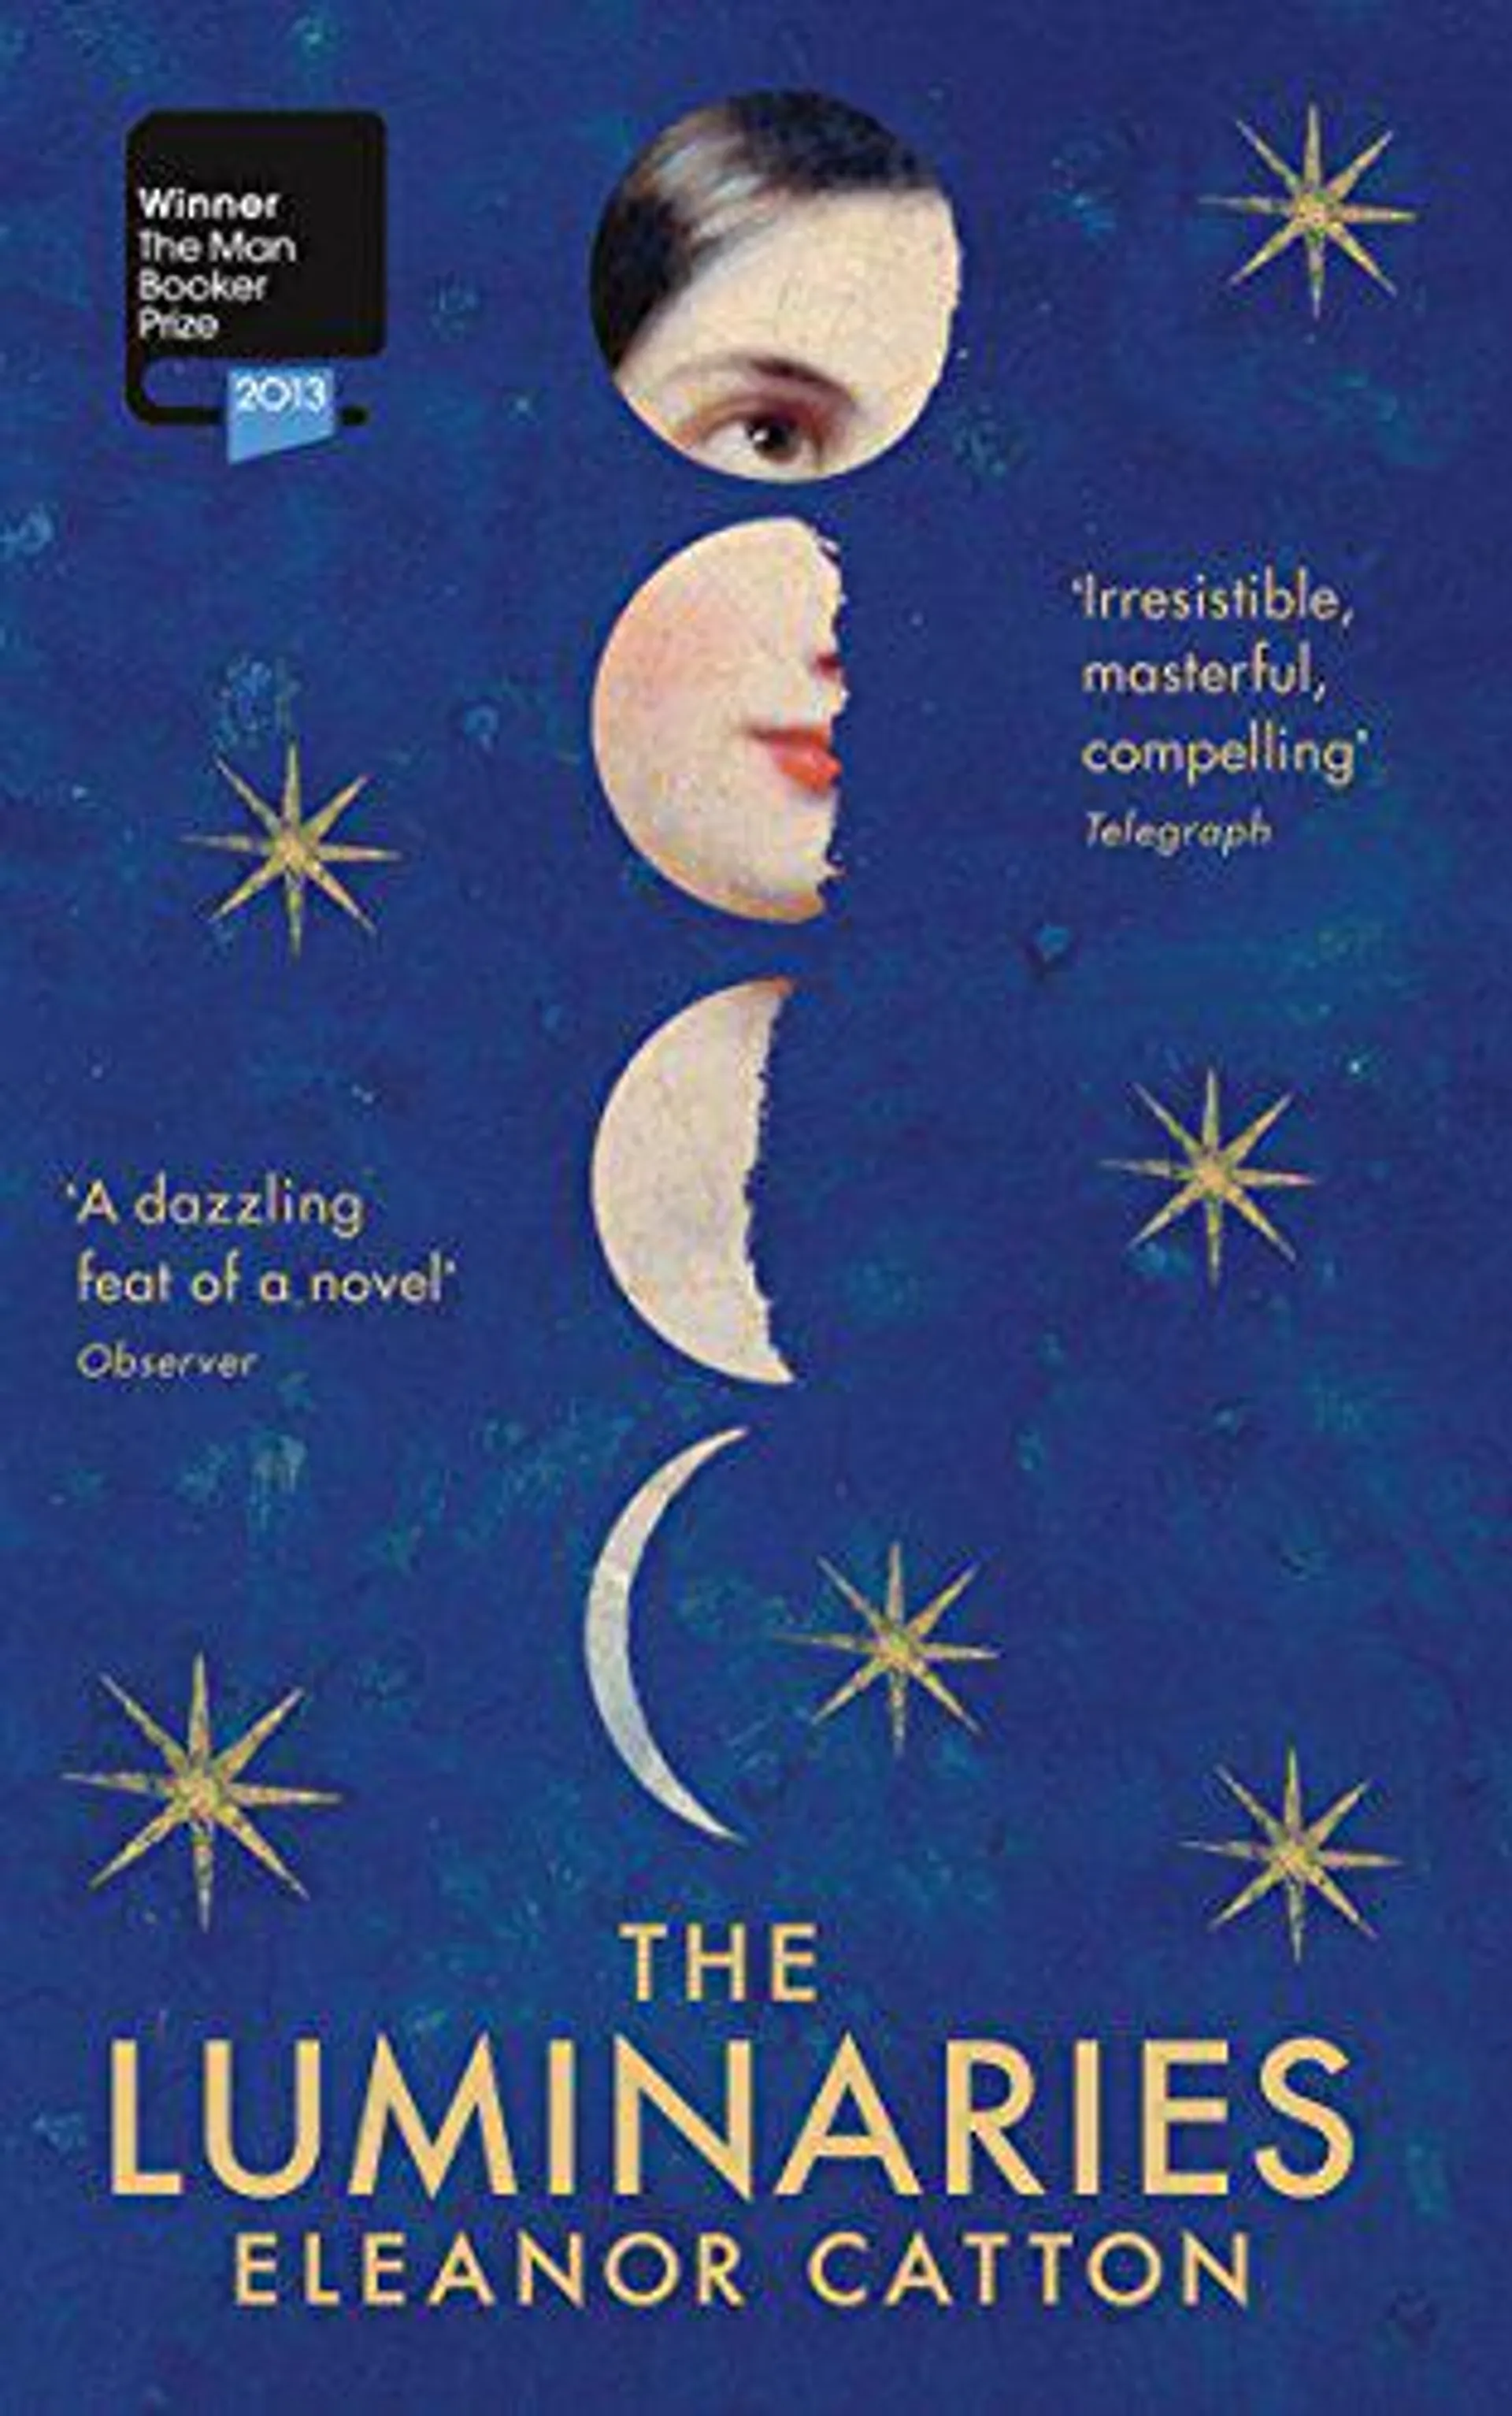 The Luminaries by Eleanor Catton (Y)